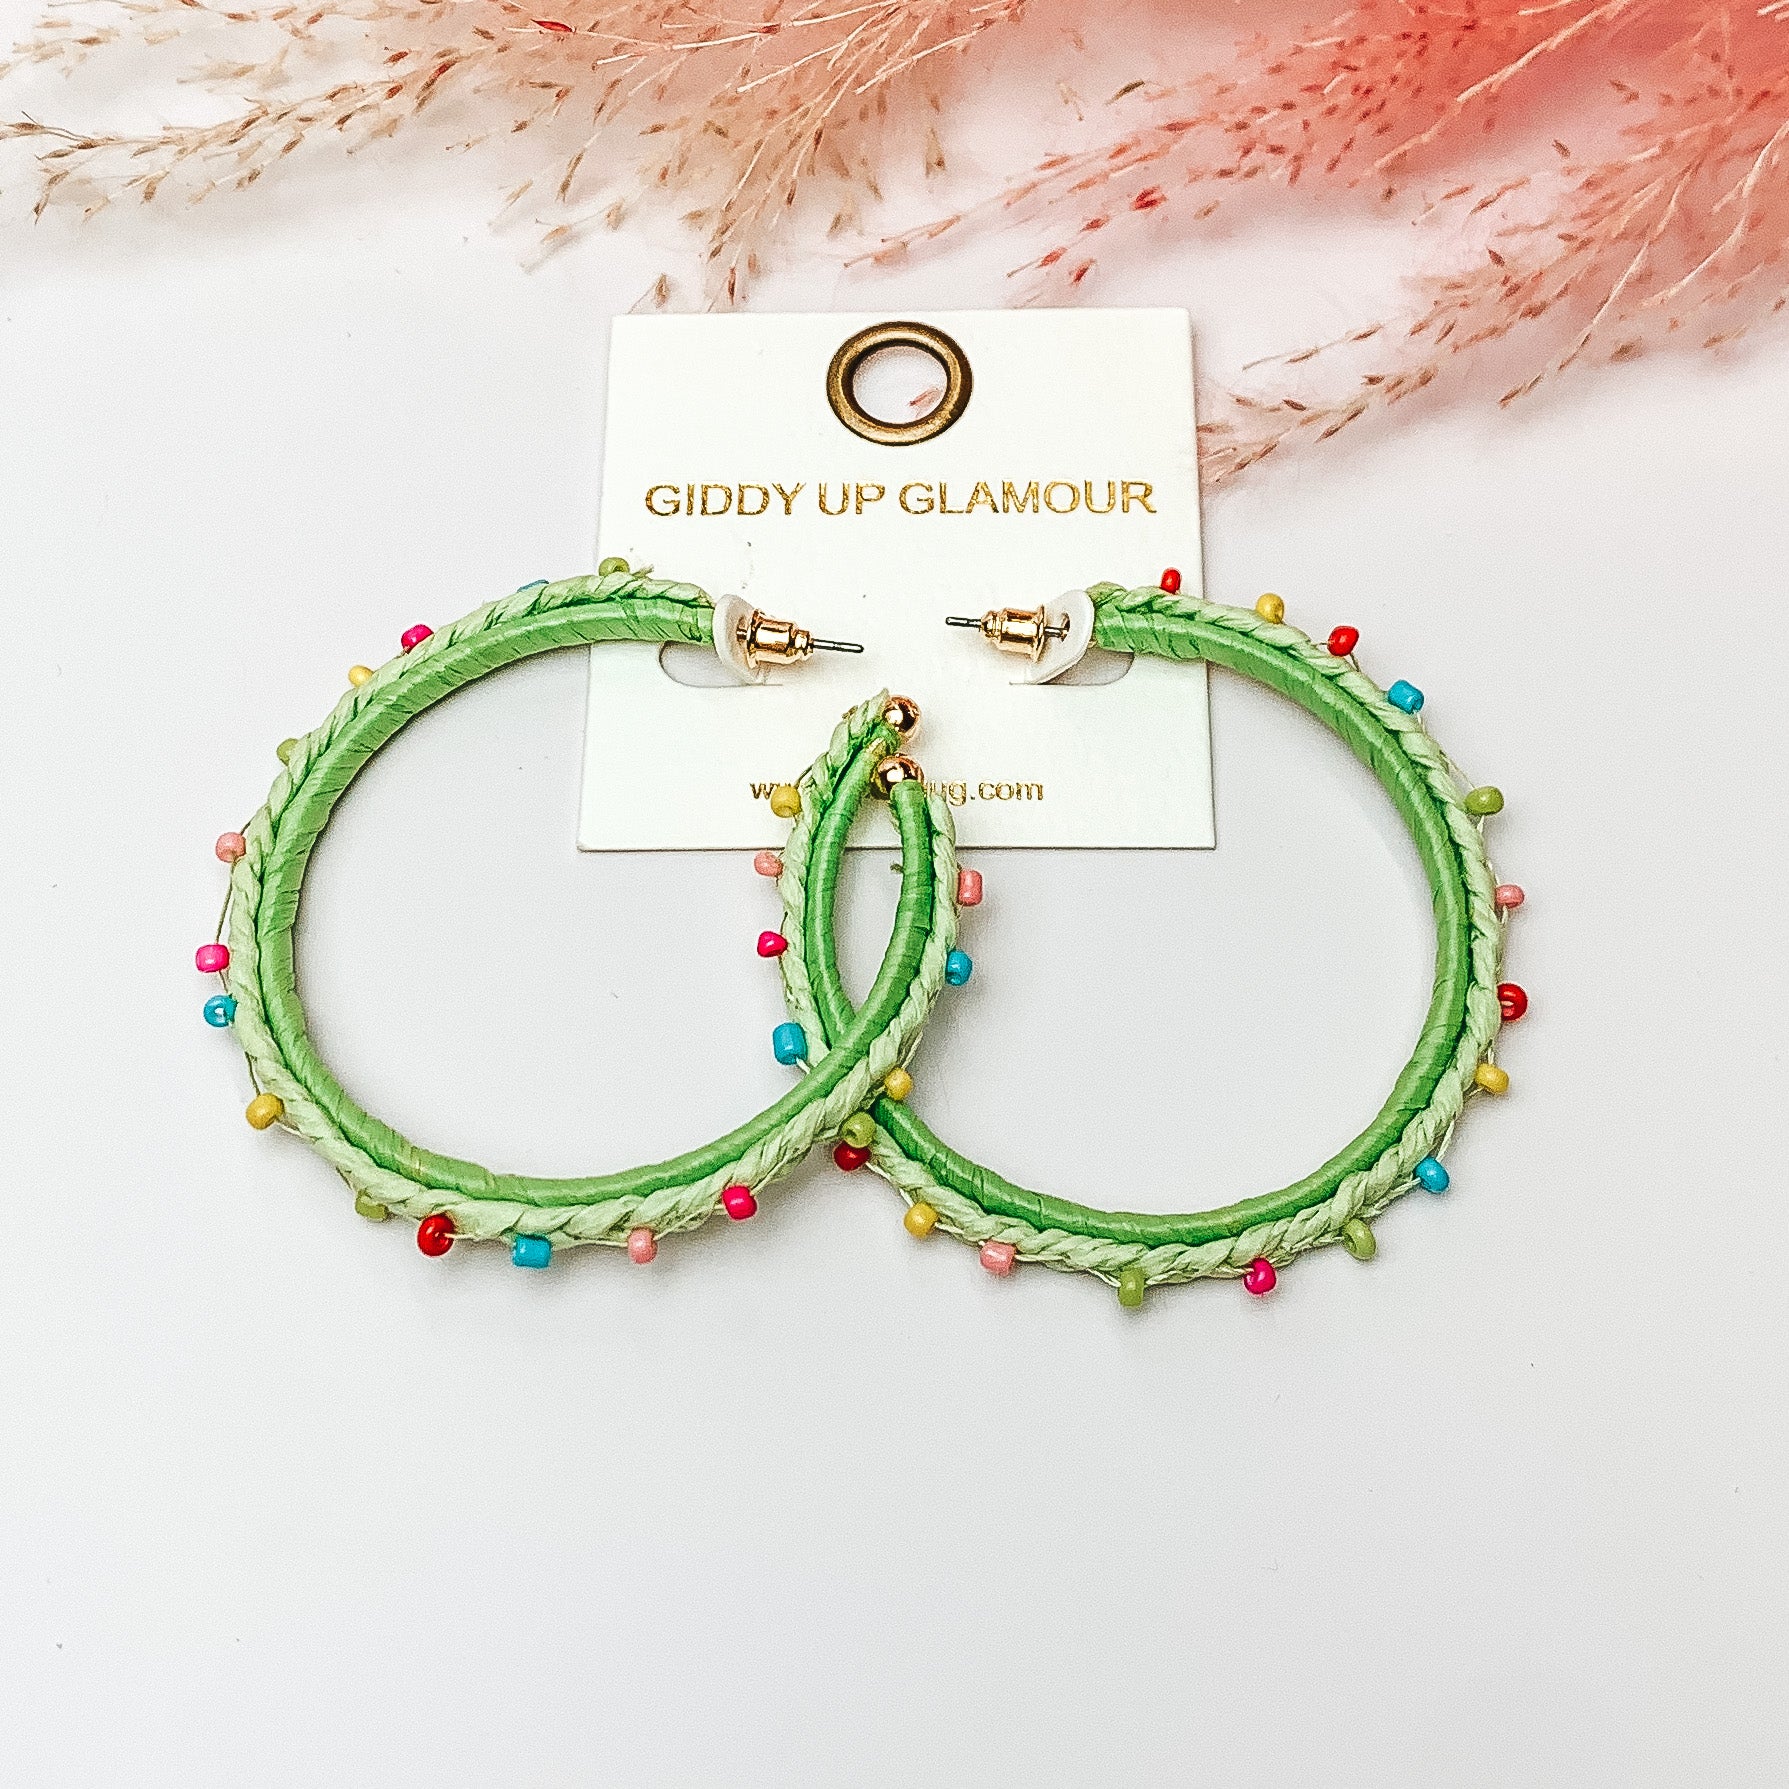 Pictured are raffia braided hoop earrings in light green with colorful beads. They are pictured with a pink feather on a white background.